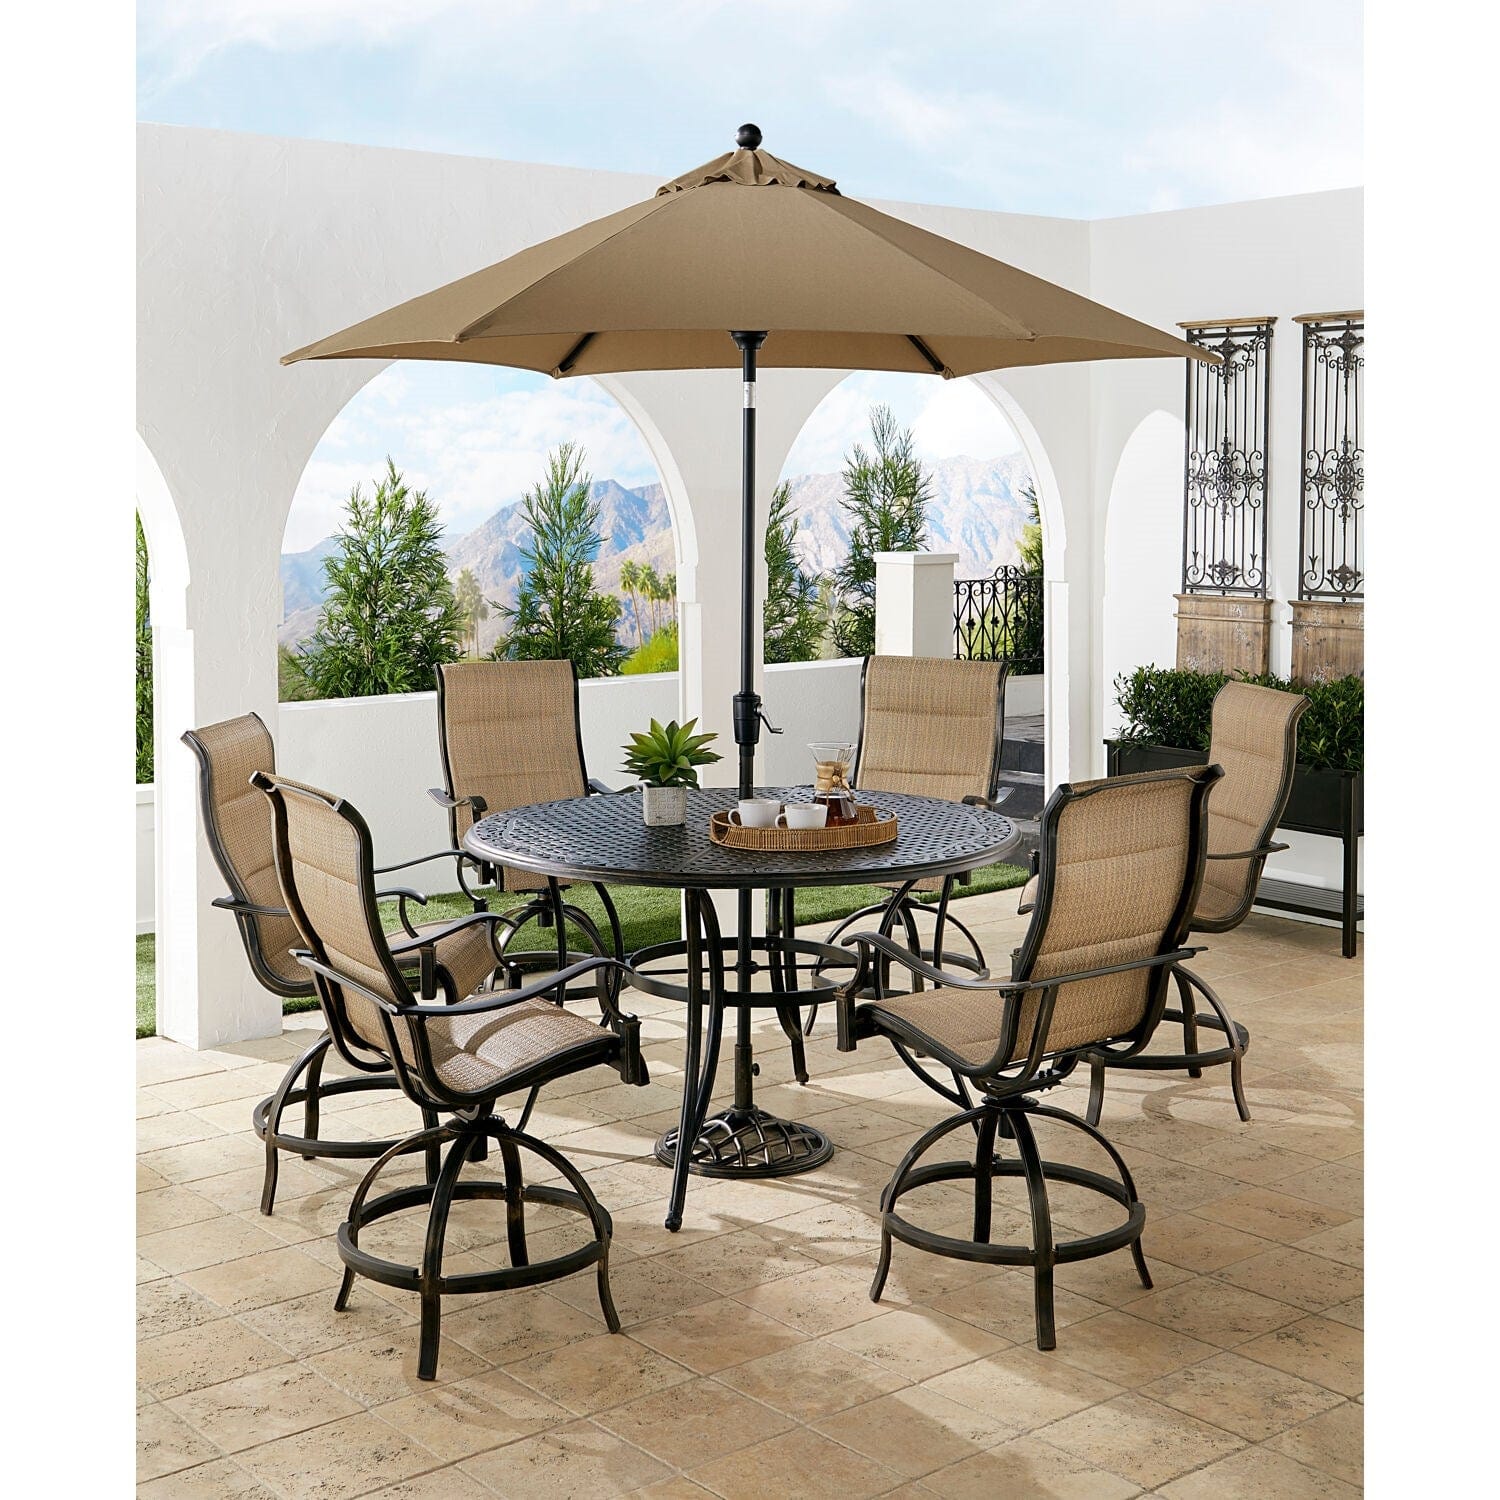 Hanover Outdoor Dining Set Hanover Traditions 7-Piece Aluminum Frame High-Dining Set in Tan with 6 Swivel Counter-Height Chairs, 56-in. Table, and 9-ft. Umbrella | TRADDN7PCPDBR-SU-T